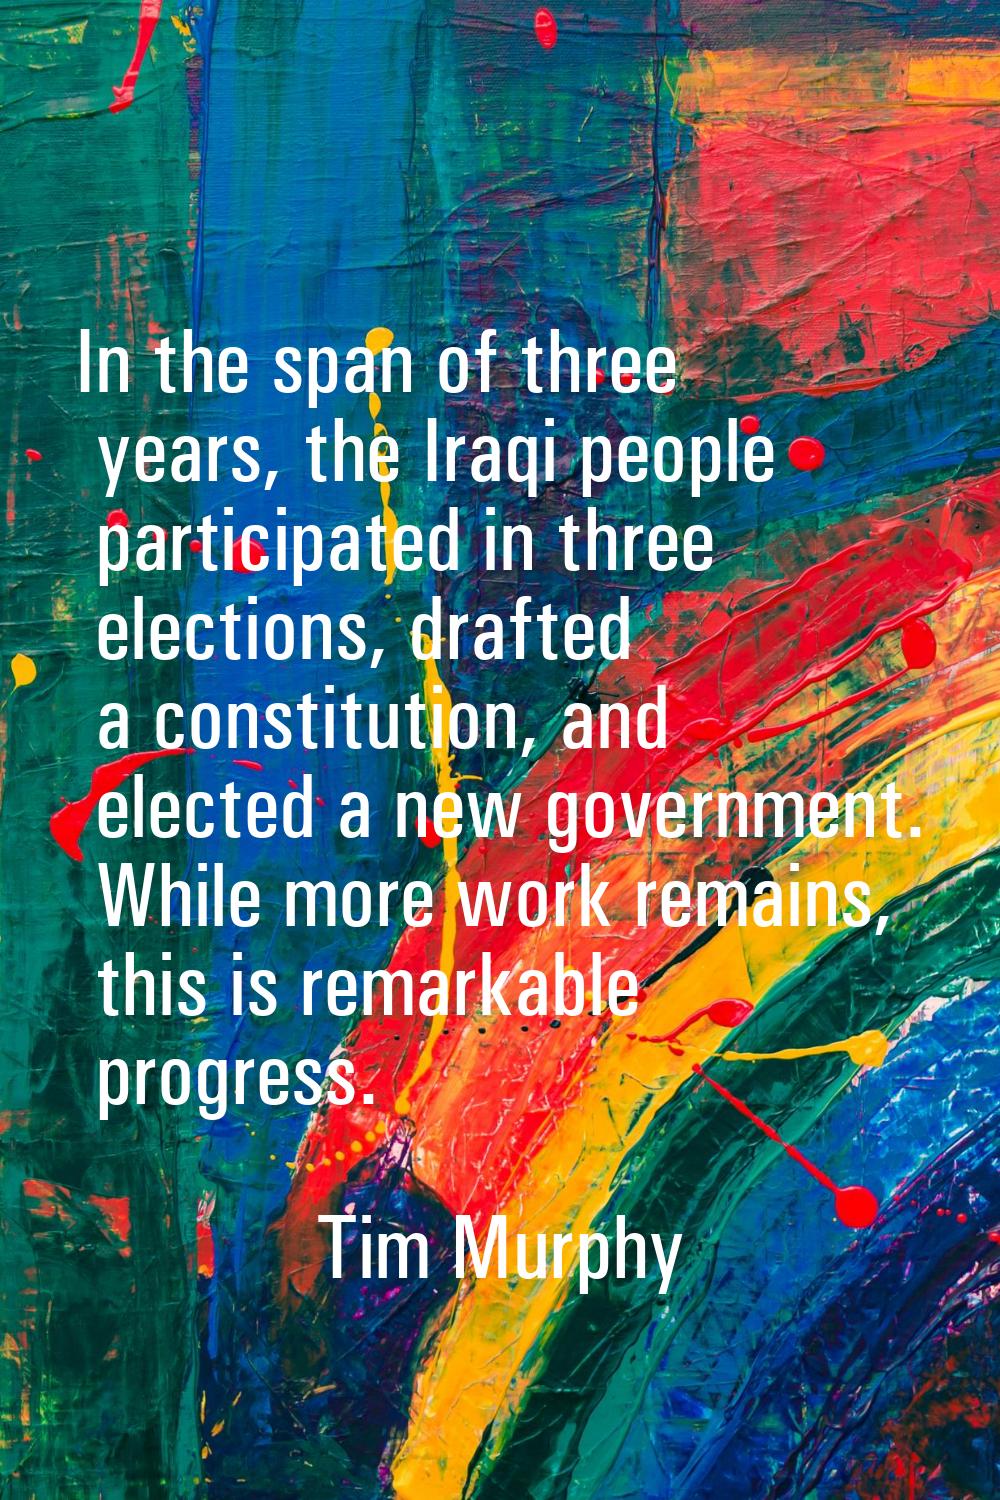 In the span of three years, the Iraqi people participated in three elections, drafted a constitutio